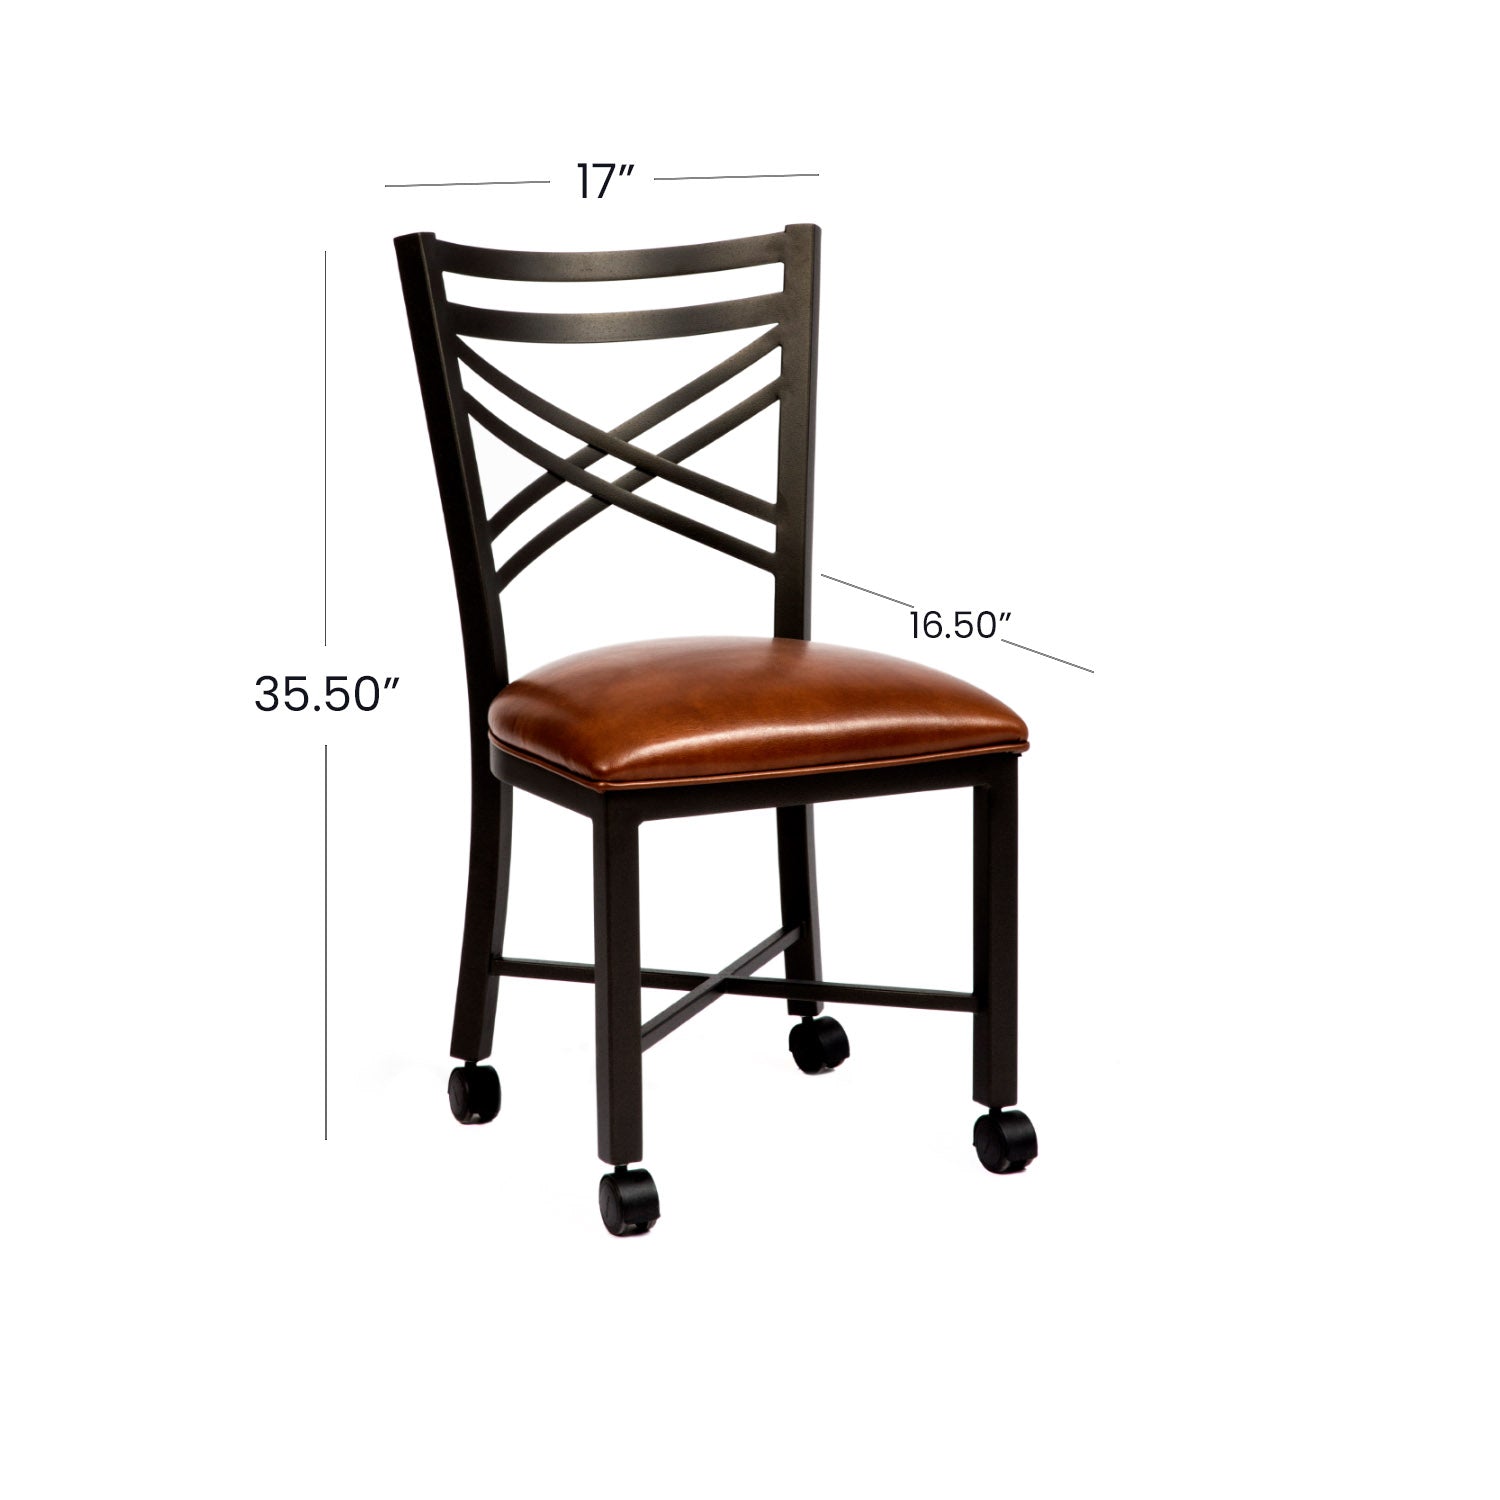 Wesley Allen Raleigh Chair with Yosemite Chestnut Vinyl and a Matte Black Finish. Casters and Dimensions